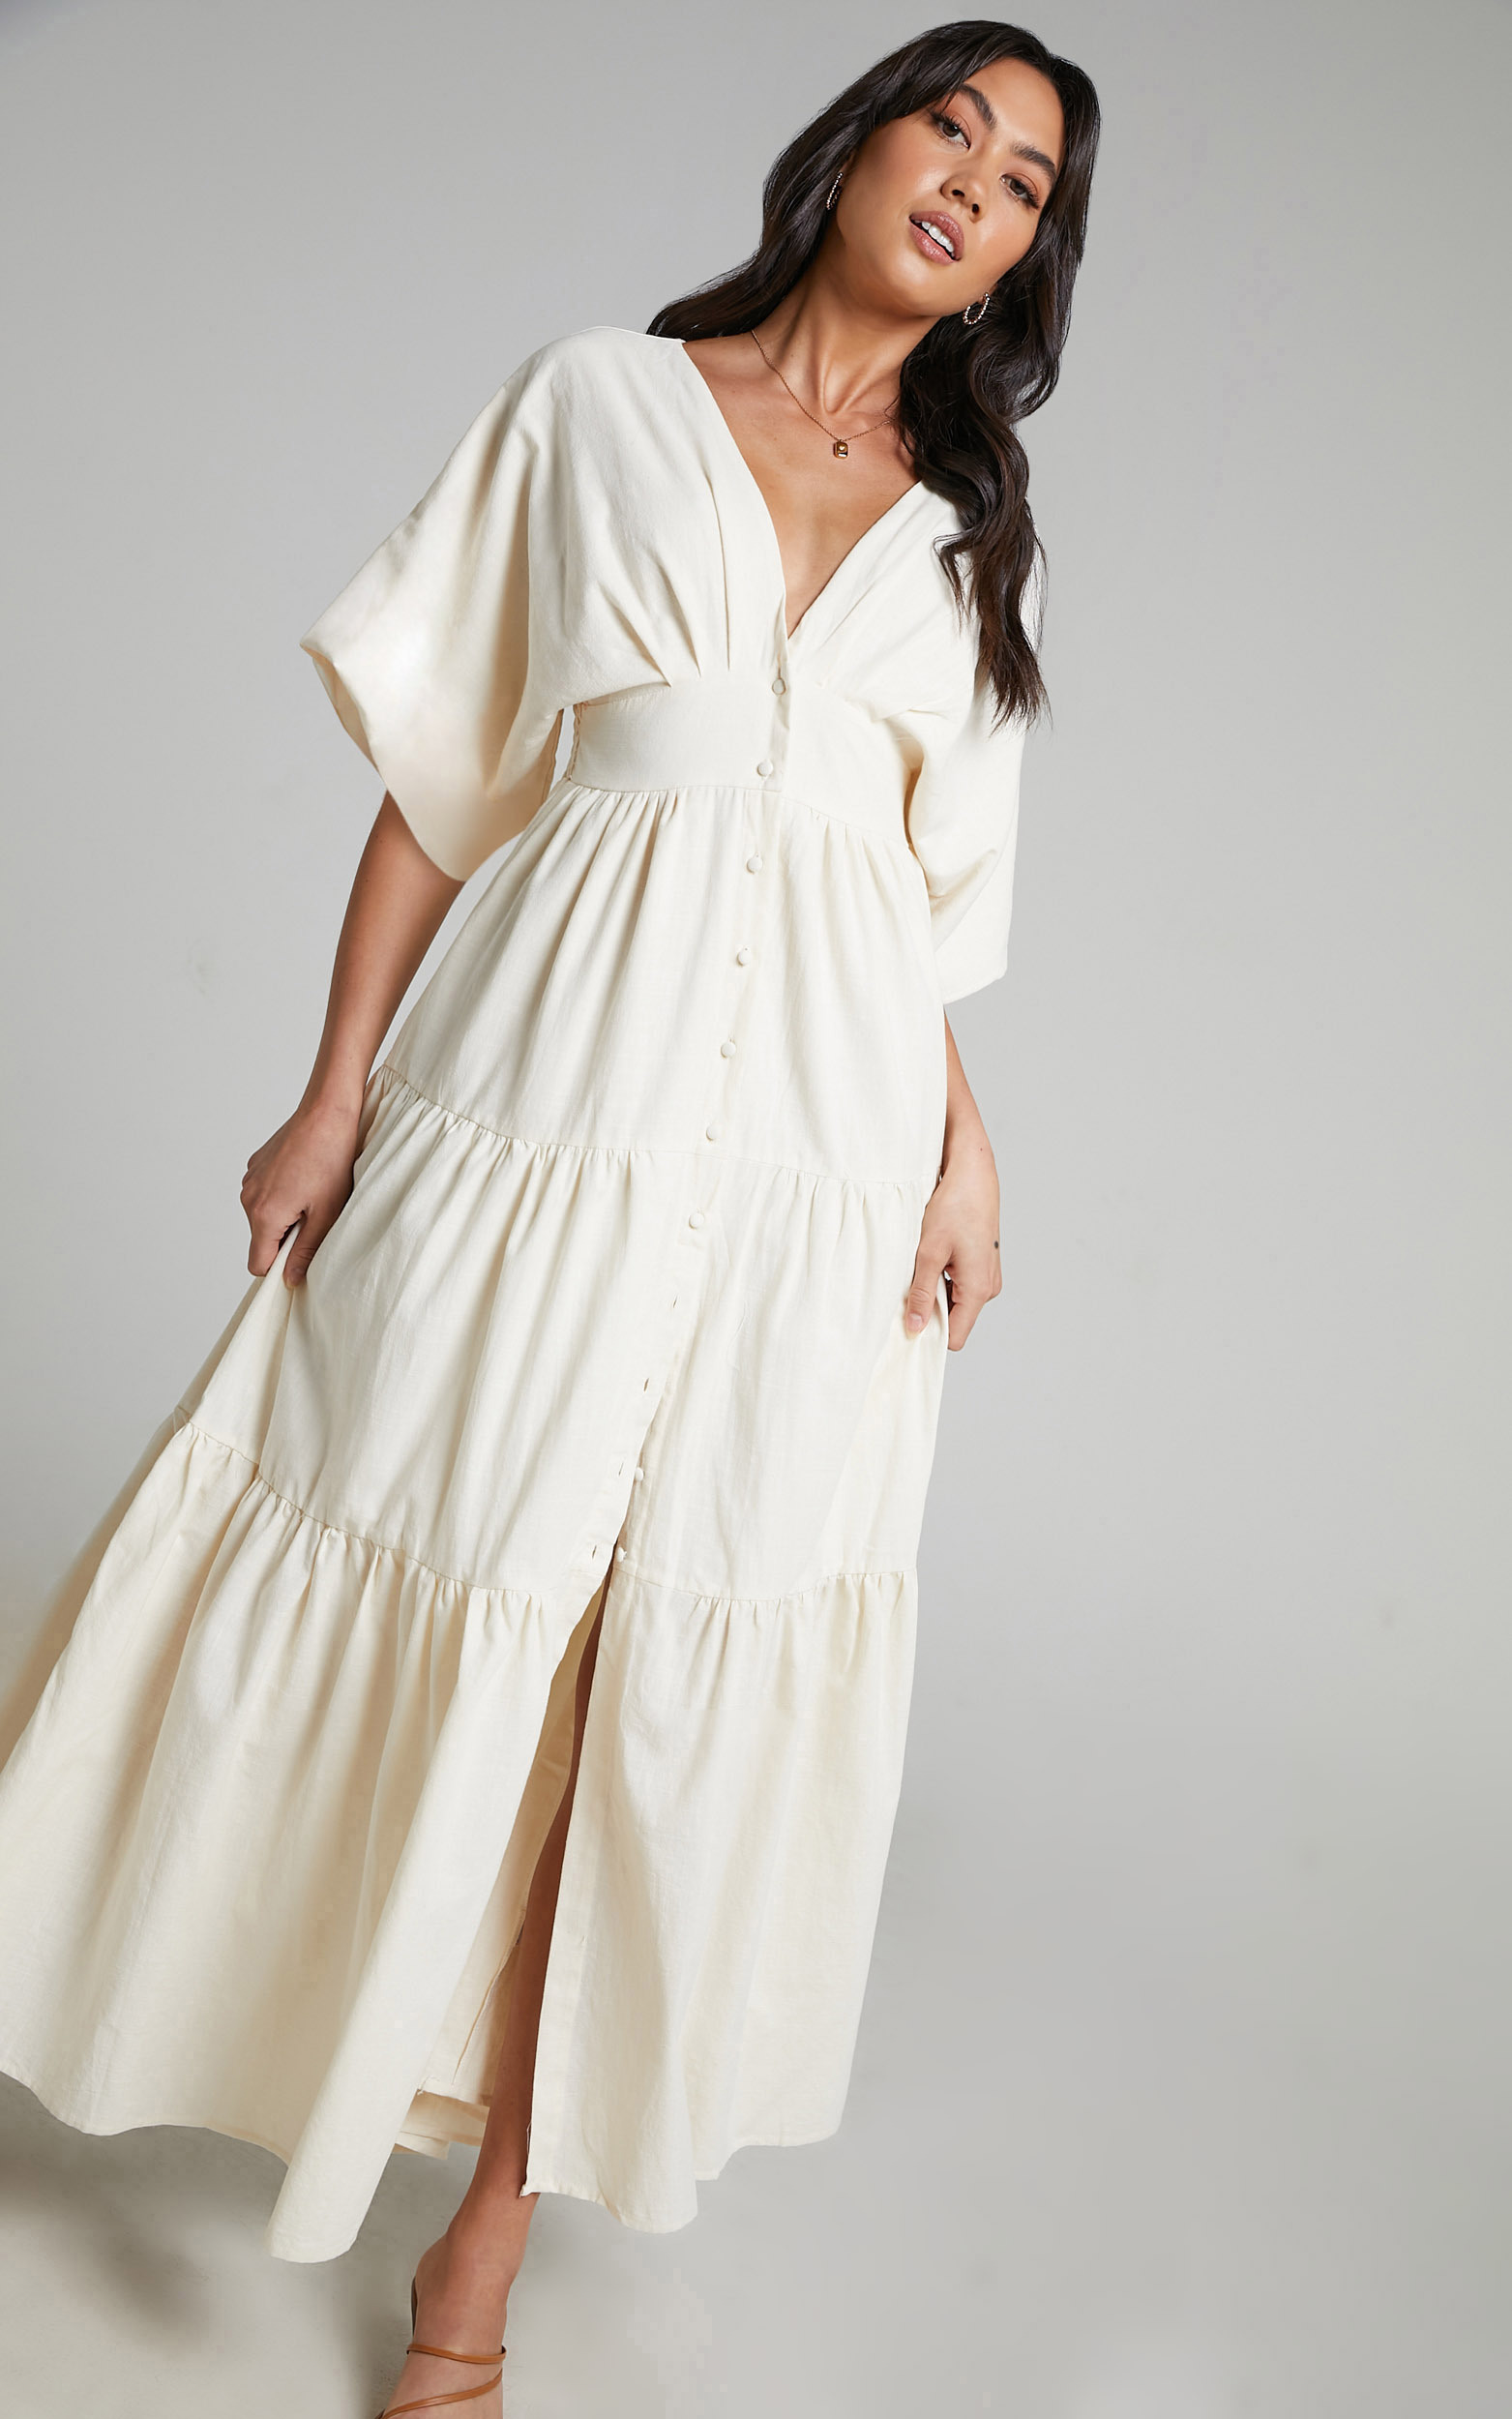 Louvain Tiered Maxi Dress in White - 06, WHT2, hi-res image number null